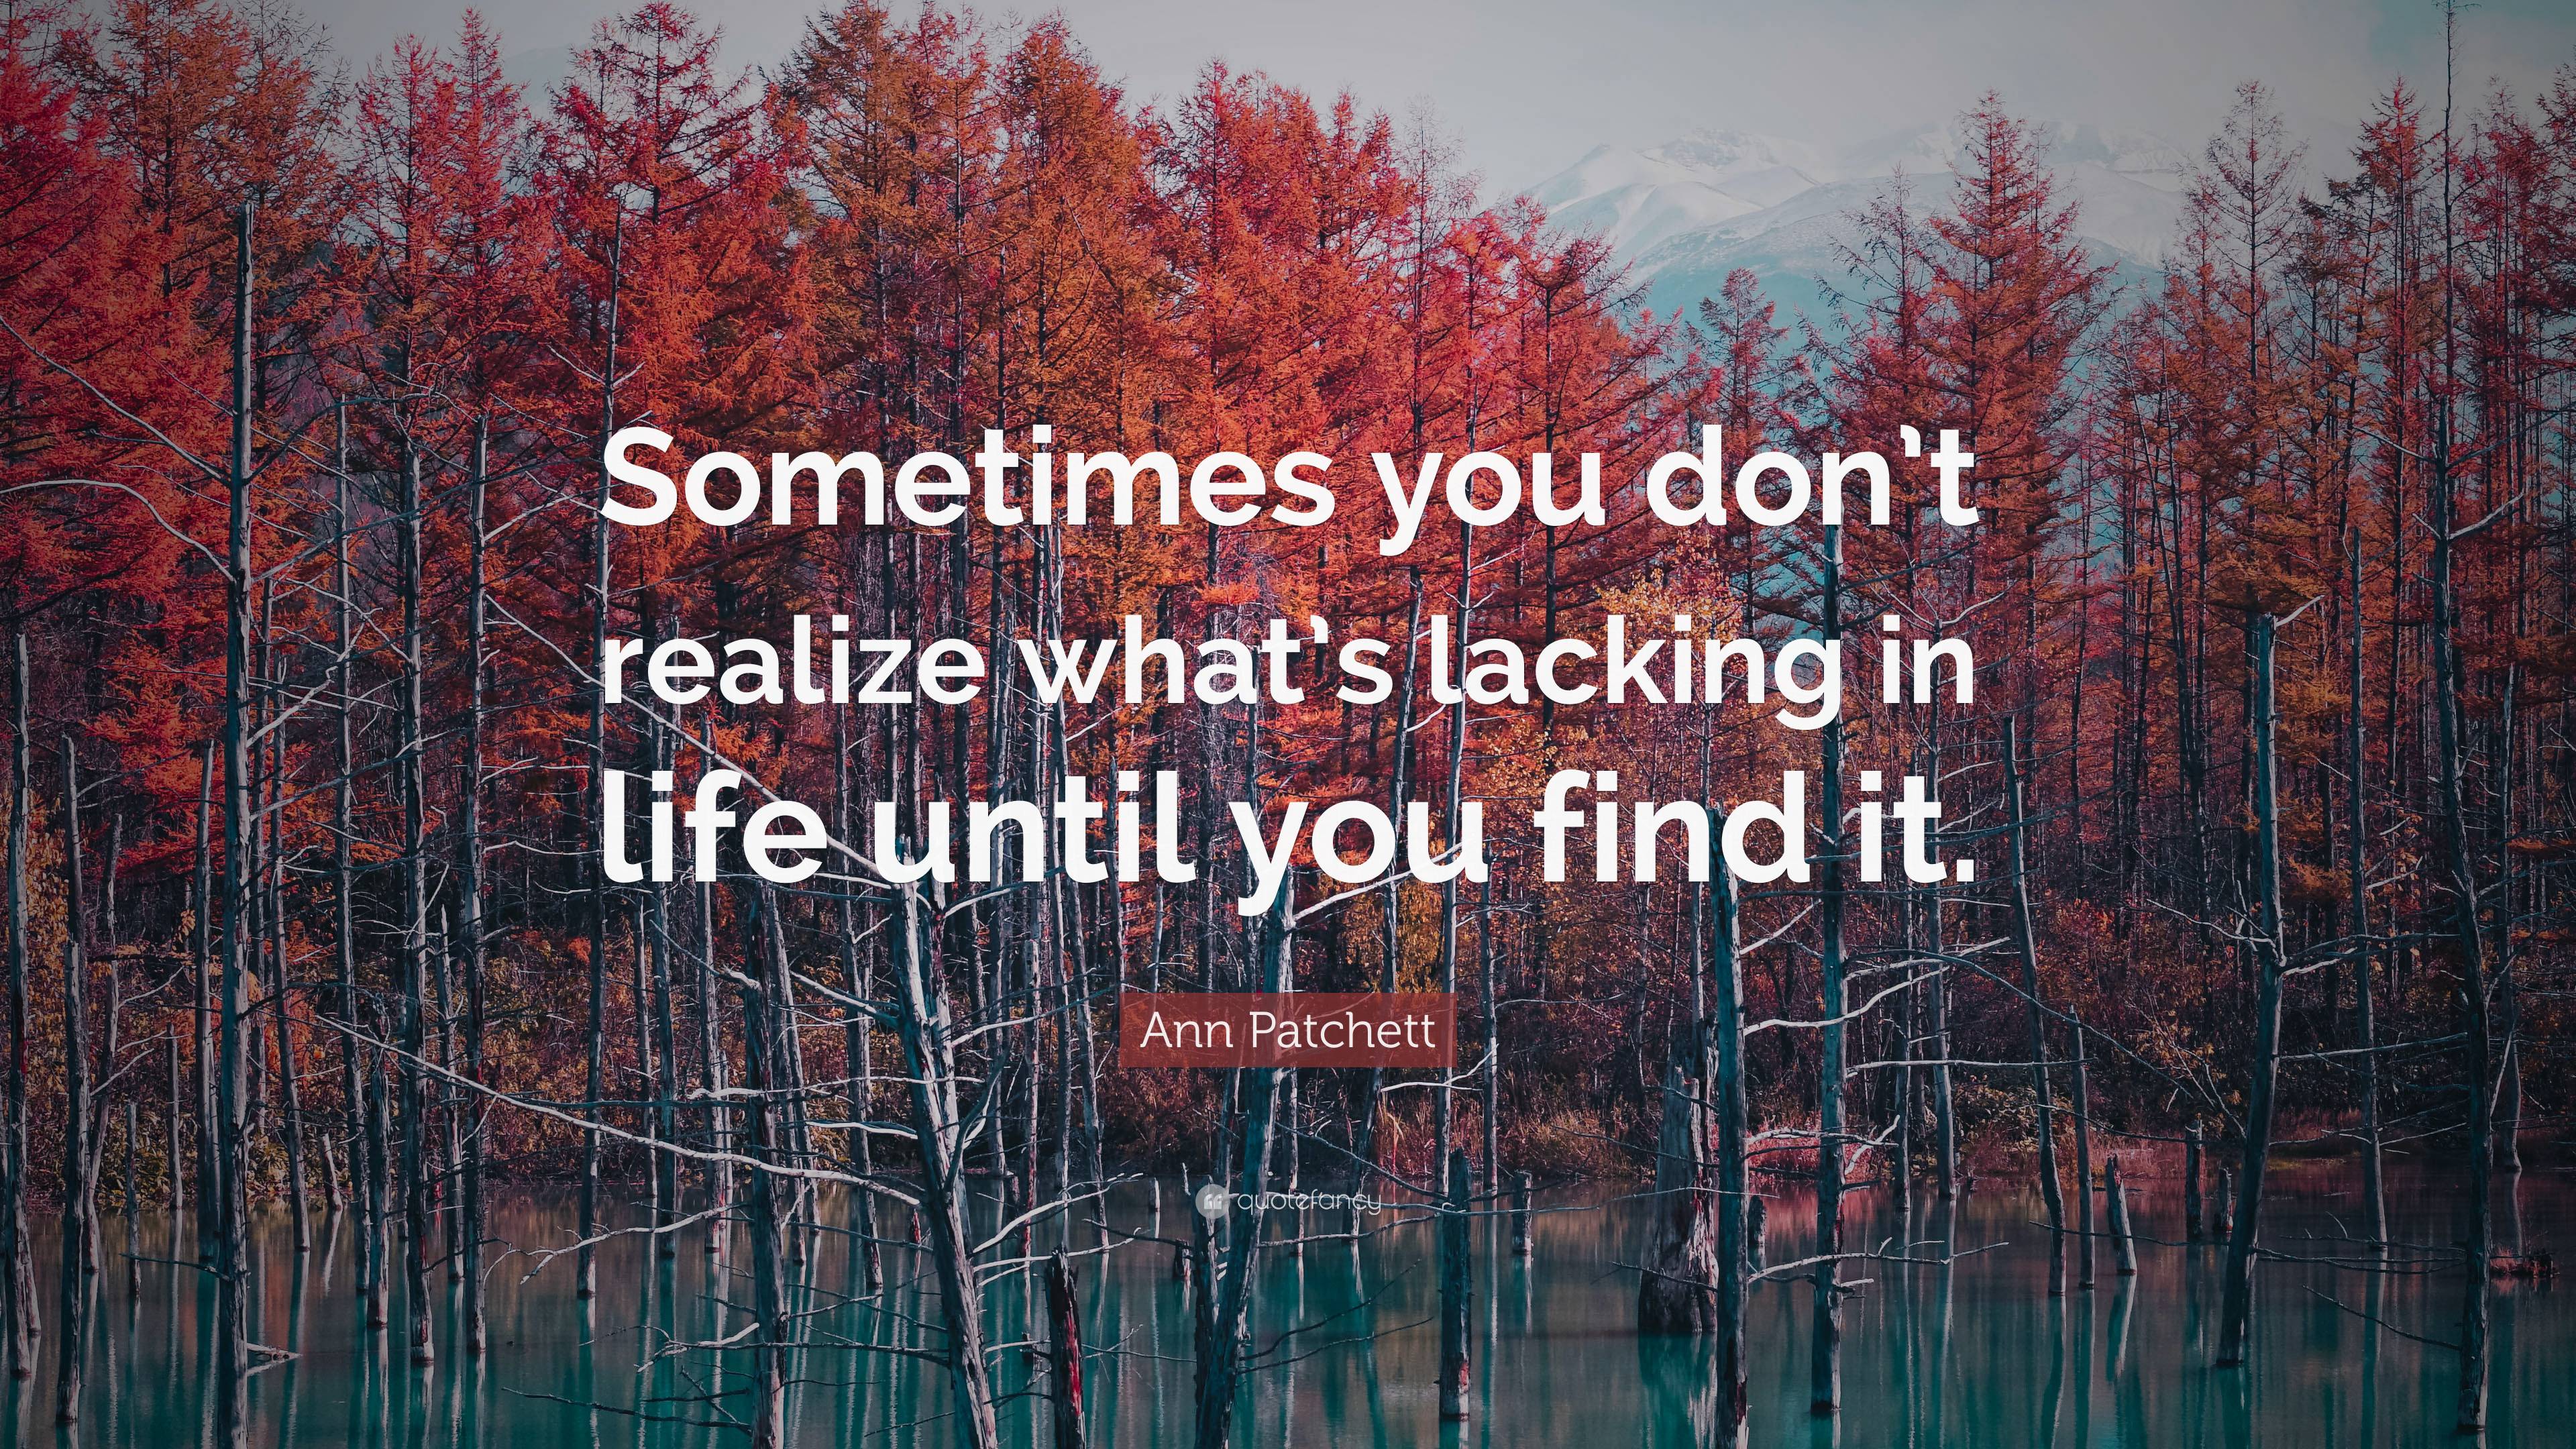 Ann Patchett Quote: “Sometimes you don’t realize what’s lacking in life ...